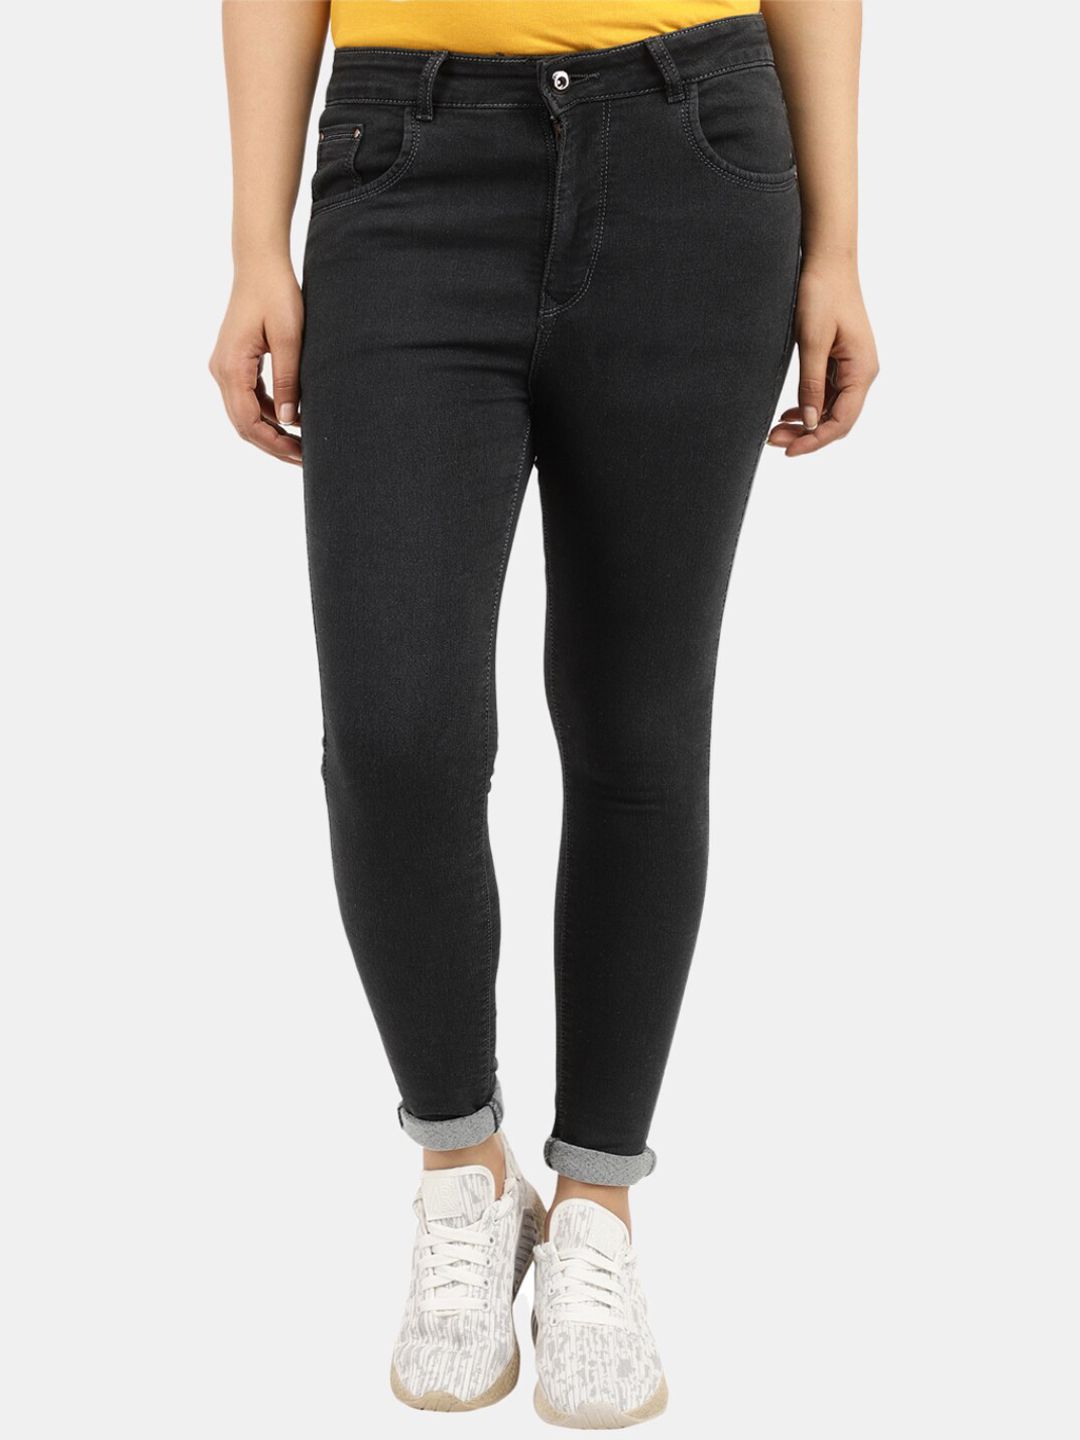 V-Mart Women Grey Stretchable Jeans Price in India